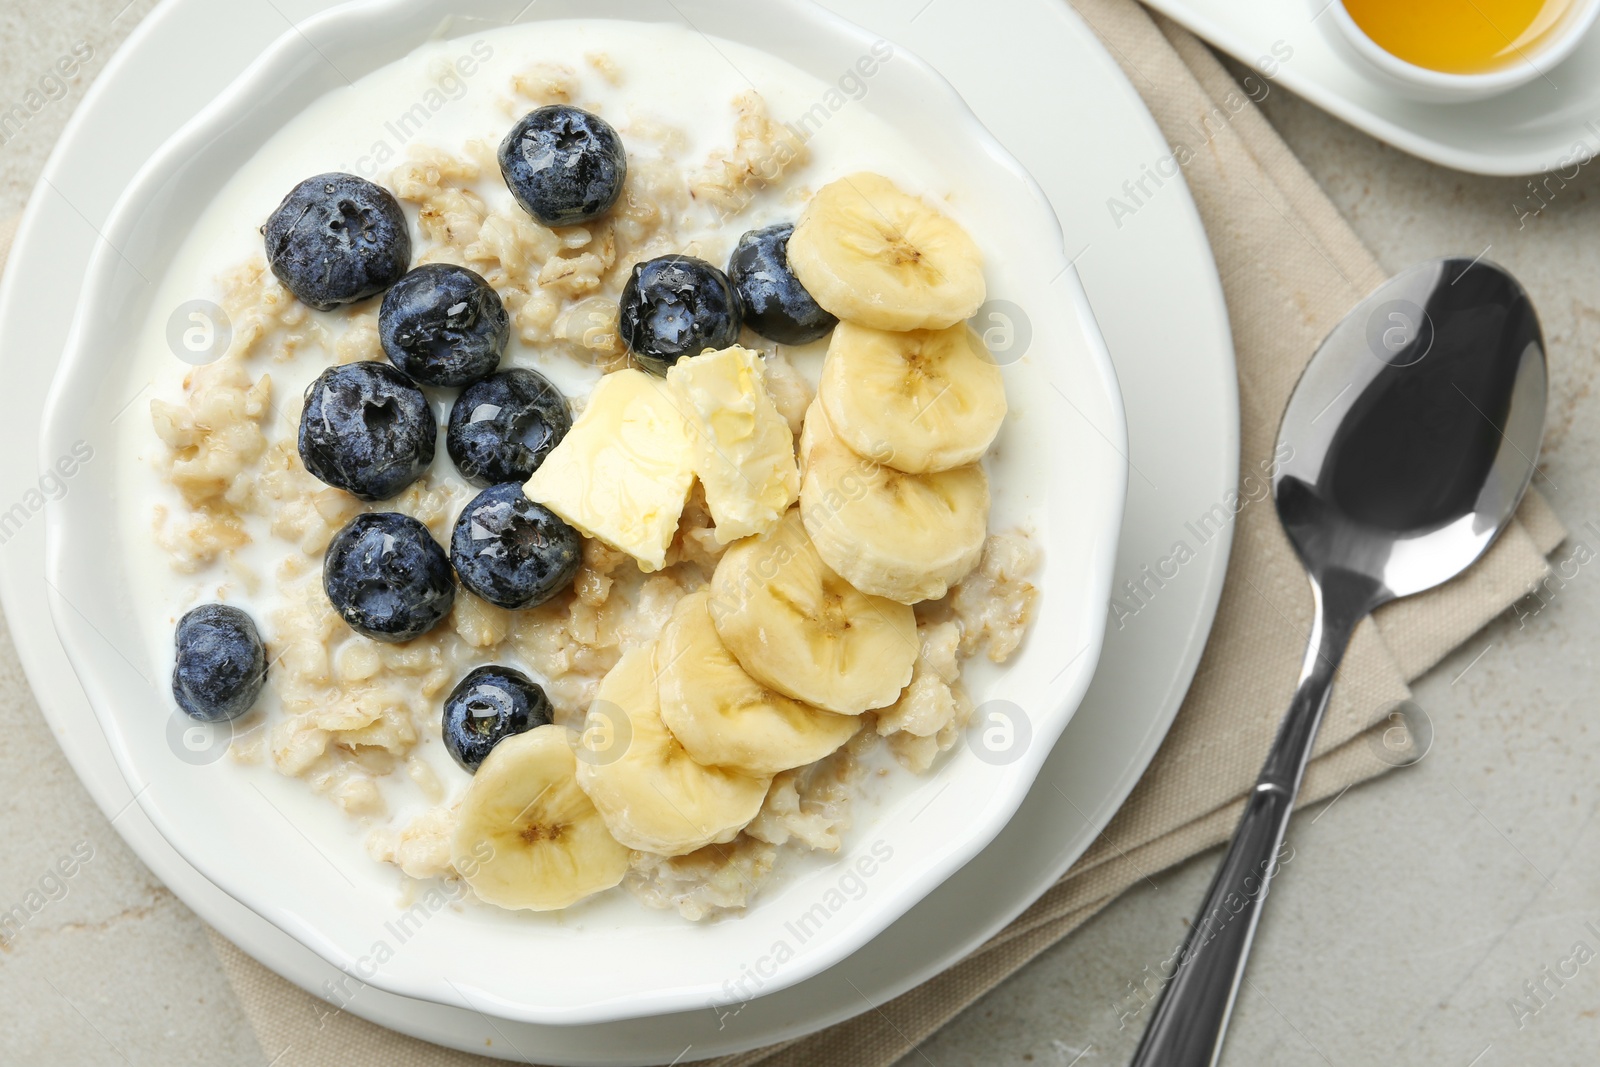 Photo of Tasty oatmeal with banana, blueberries, butter and milk served in bowl on light grey table, flat lay